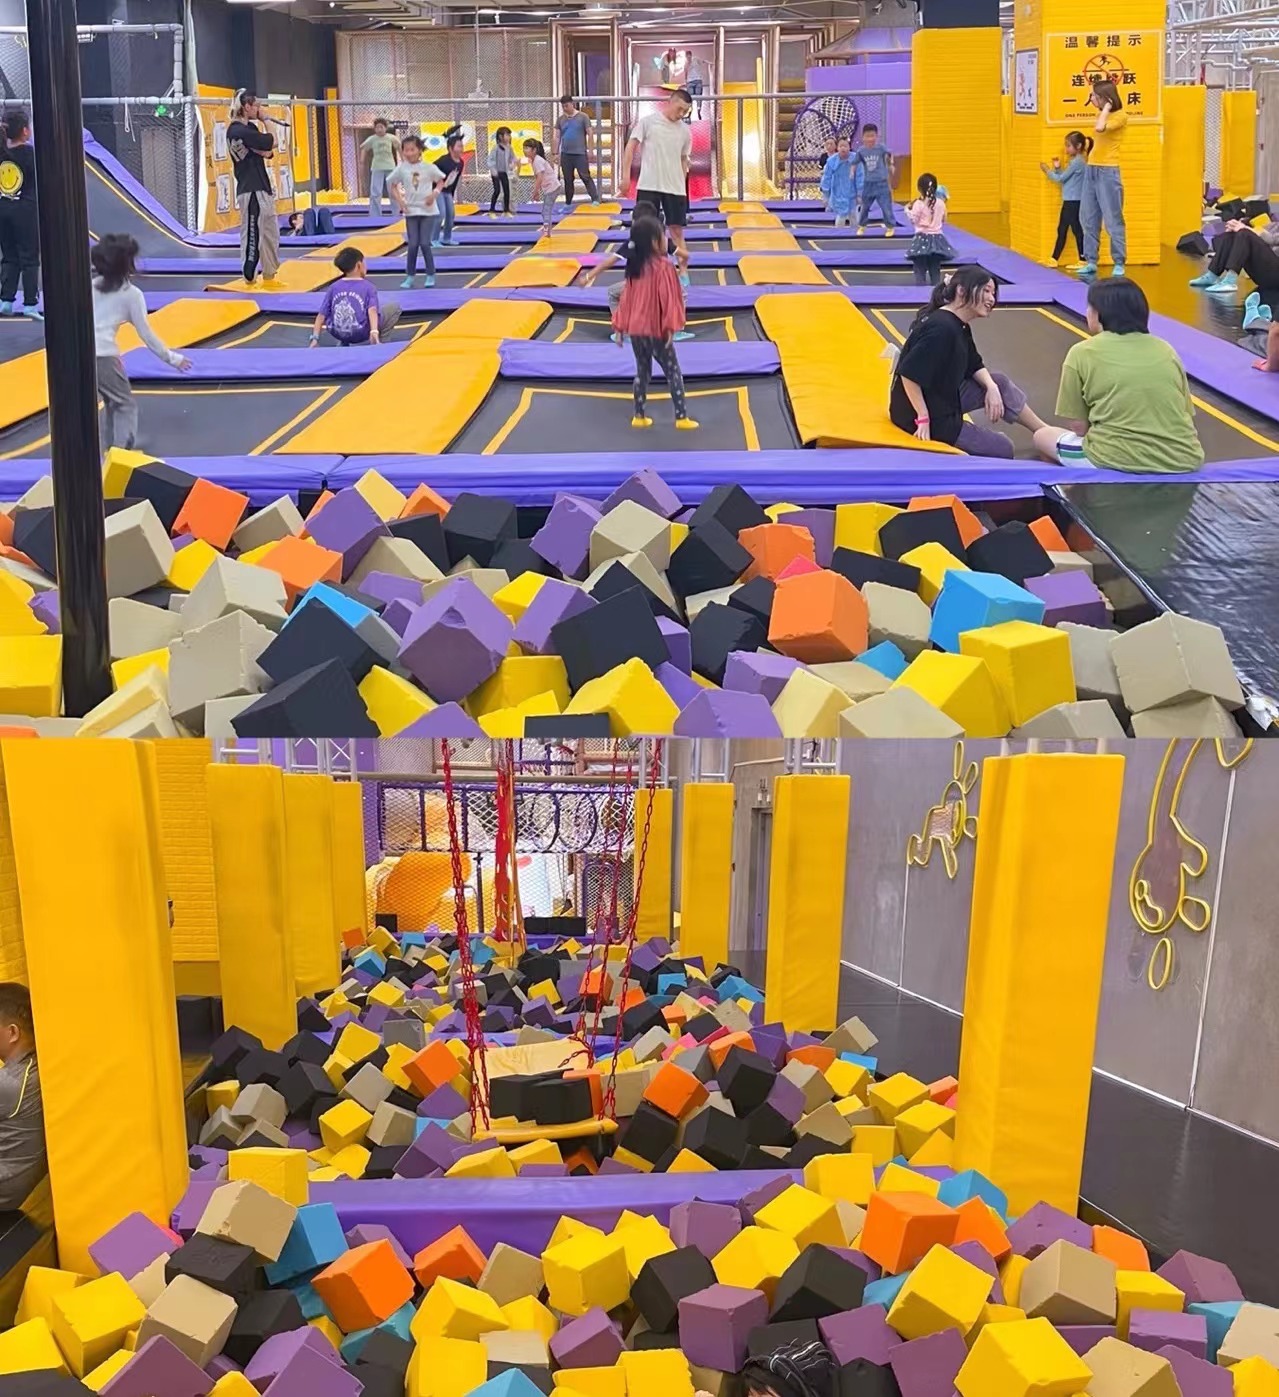 Indoor trampoline park brings many benefits to fast-paced life